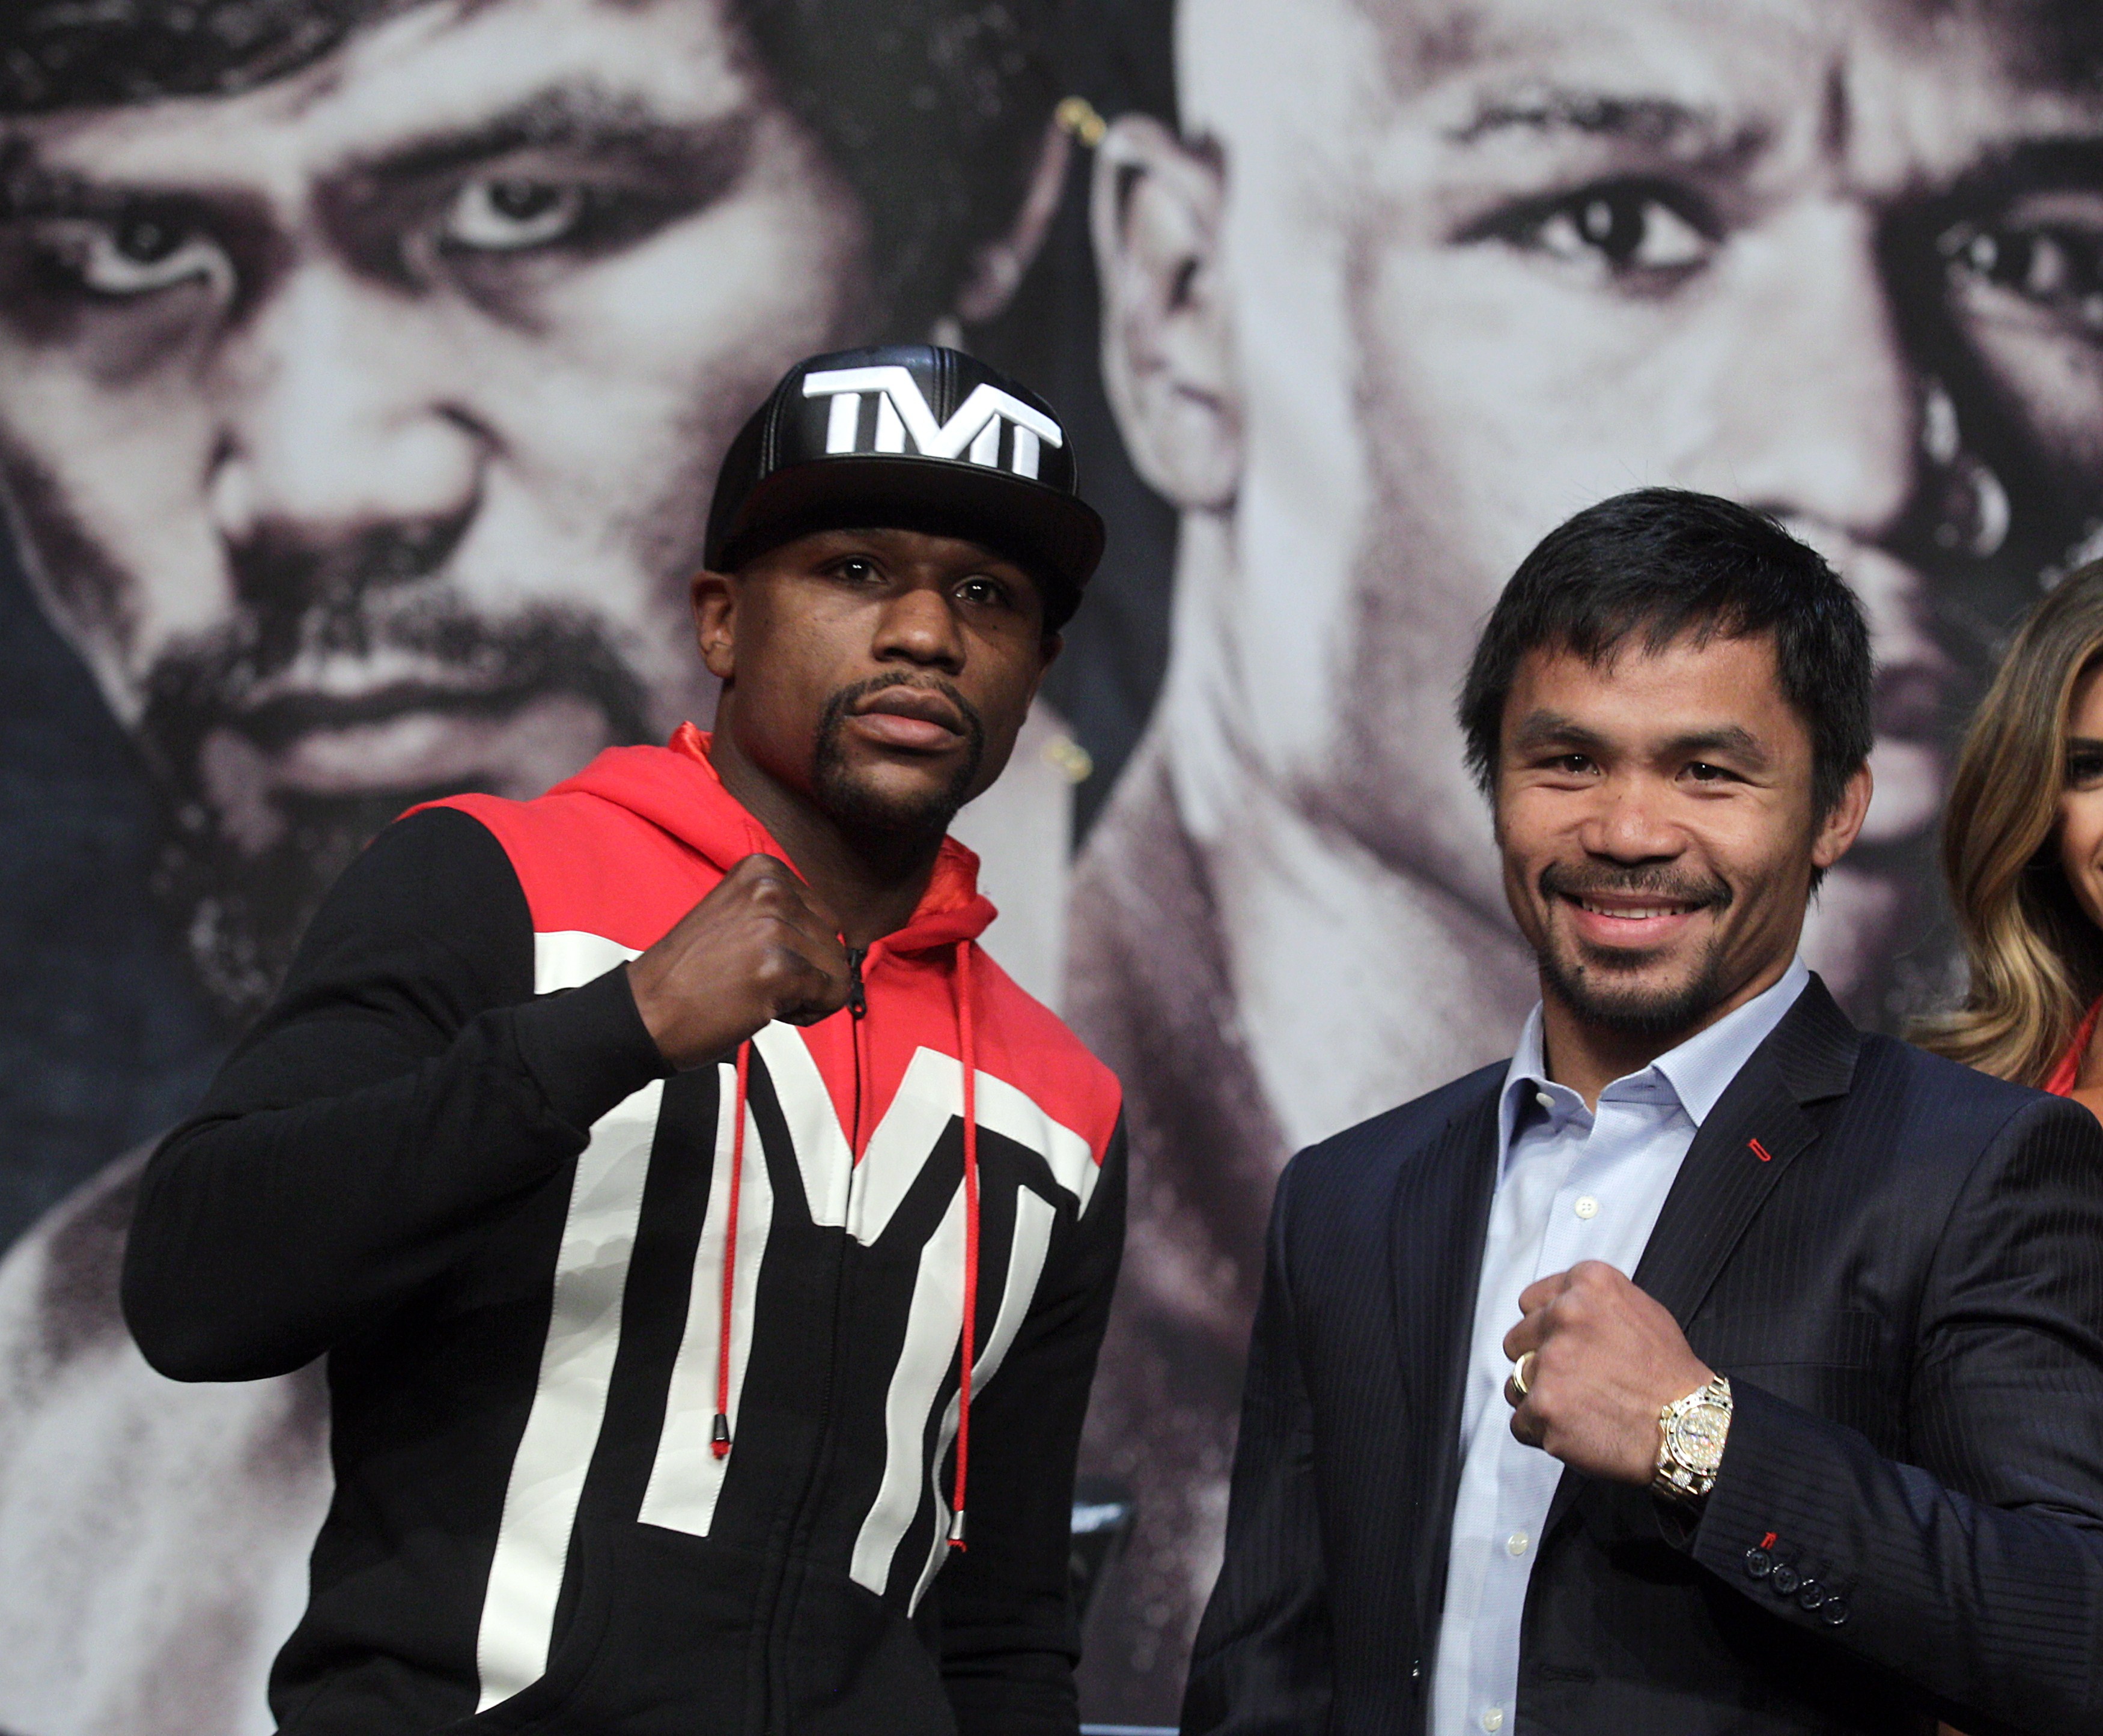 WBC/WBA welterweight champion Floyd Mayweather Jr. (L) and WBO welterweight champion Manny Pacquiao pose during a news conference at the KA Theatre at MGM Grand Hotel &amp; Casino on April 29, 2015 in Las Vegas, Nevada. The two will face each other in a unification bout on May 2, 2015 in Las Vegas. (JOHN GURZINSKI—AFP/Getty Images)